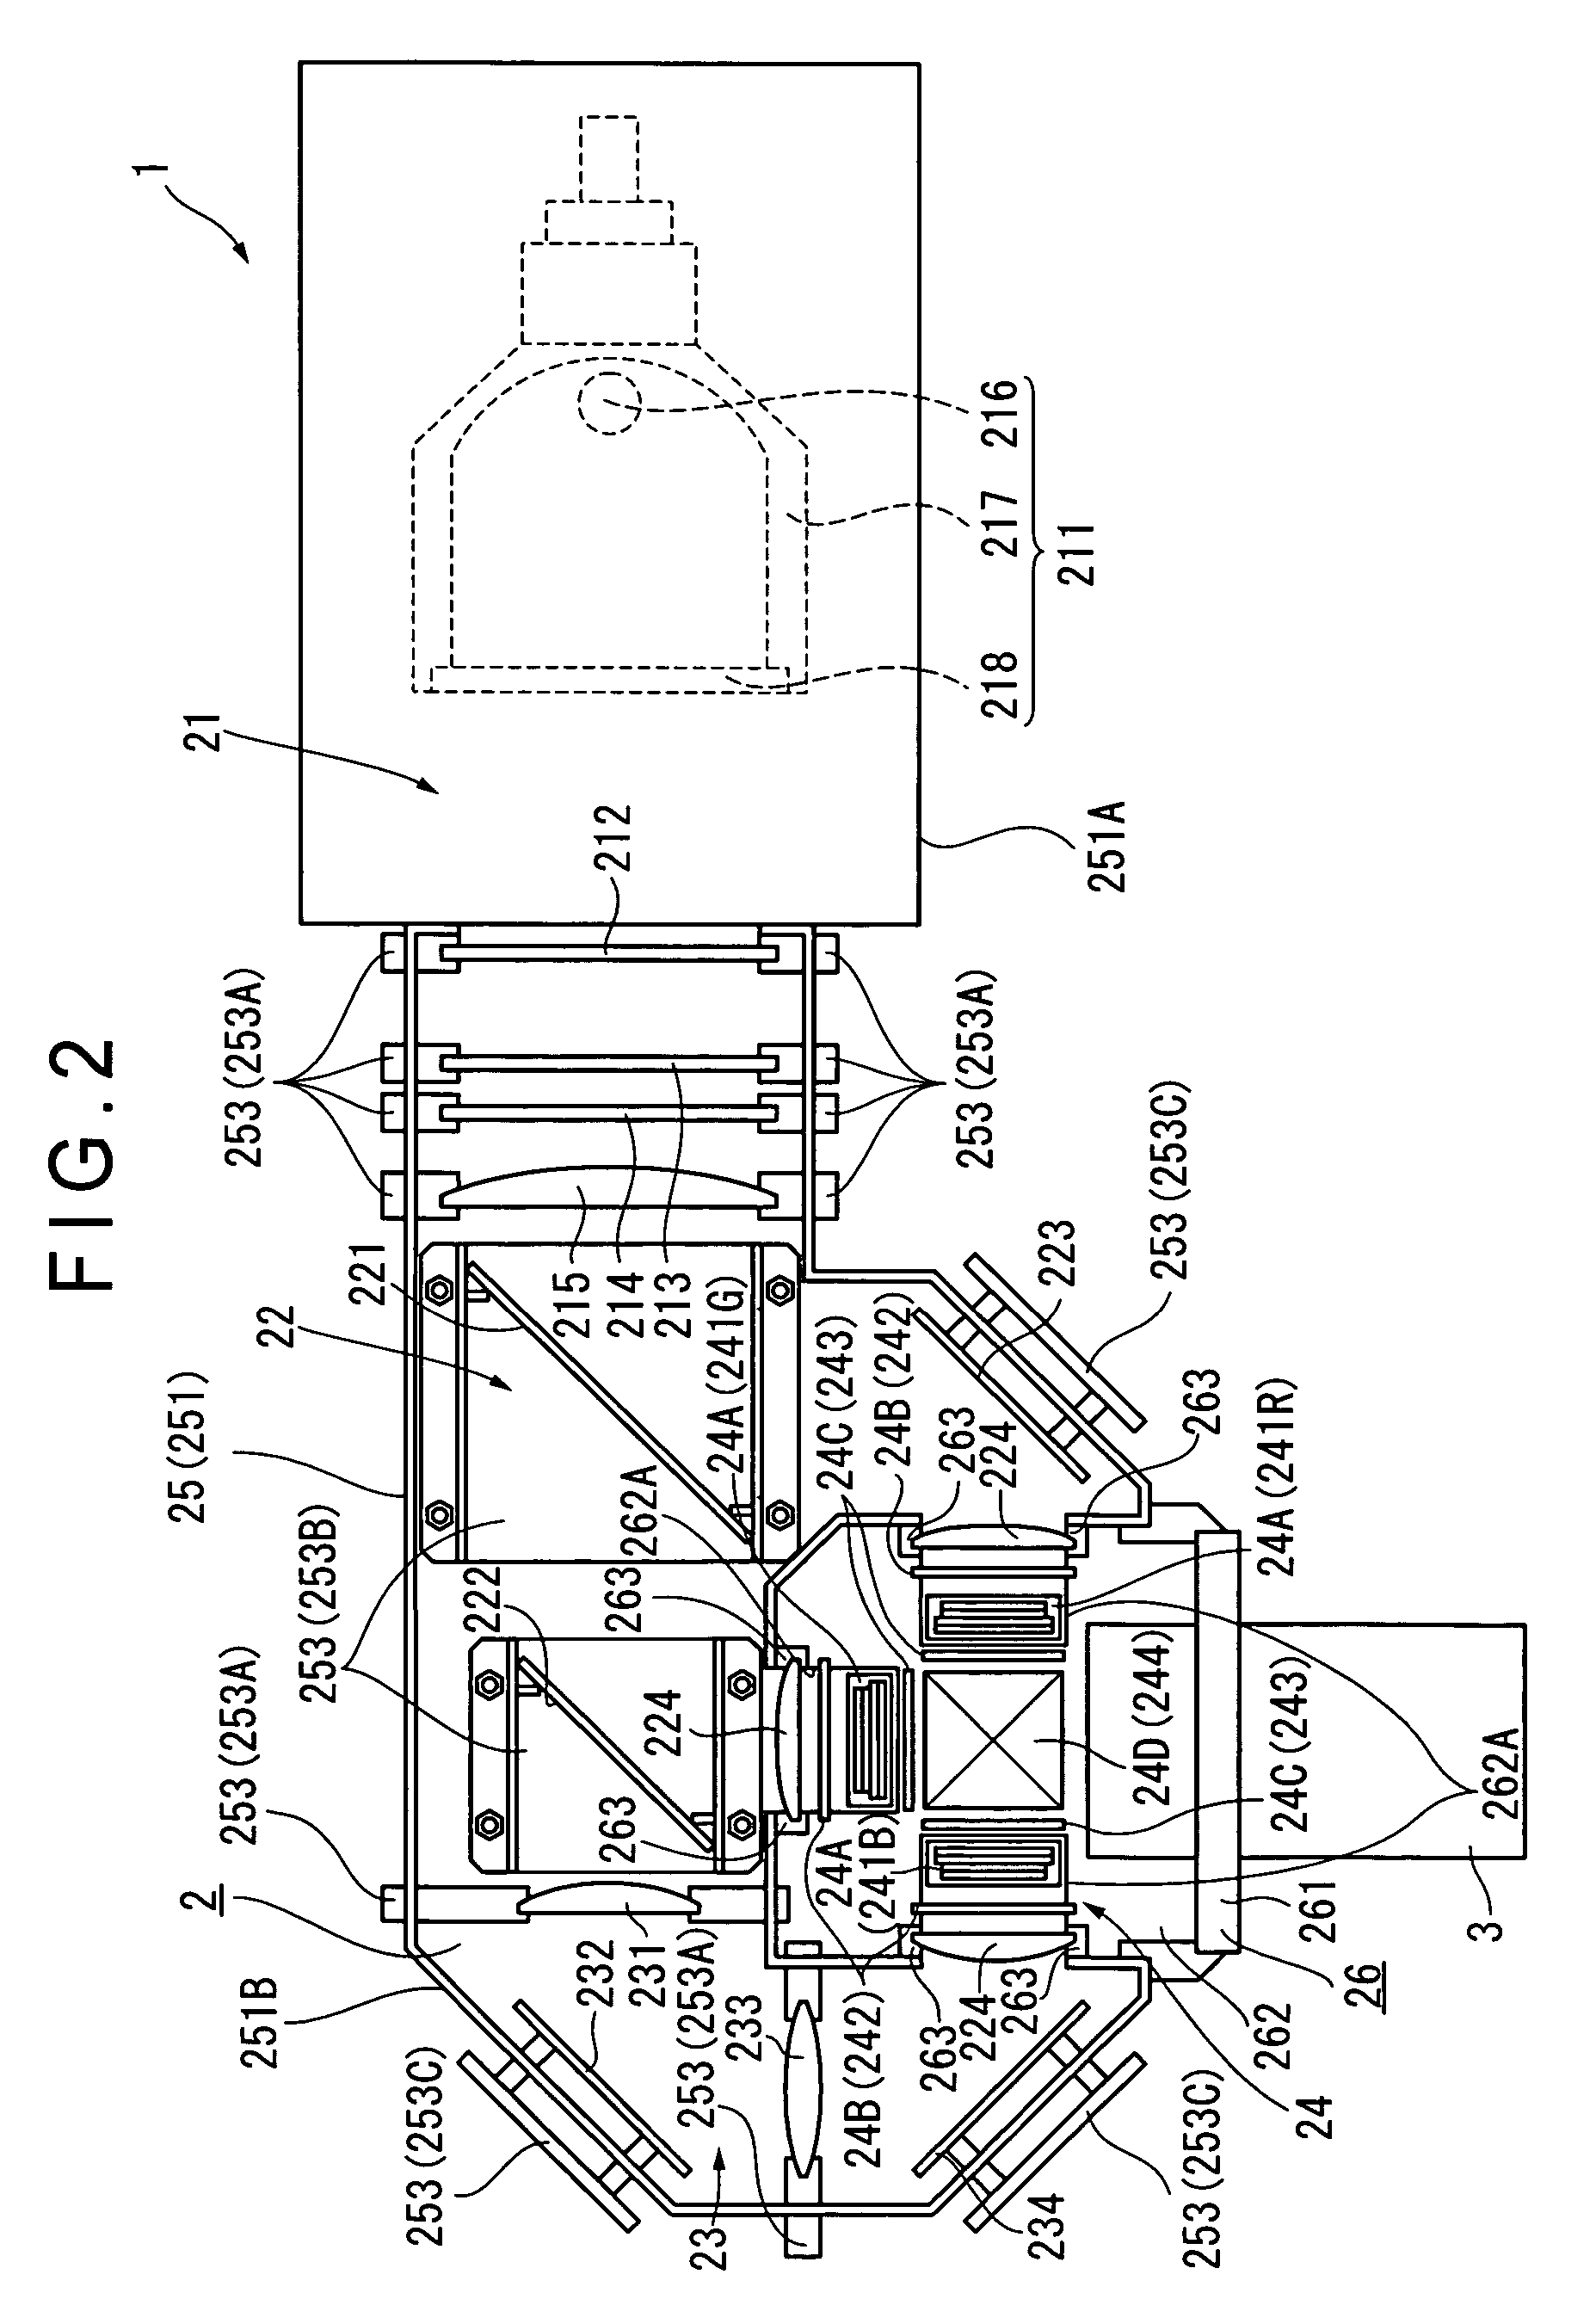 Optical device and protector